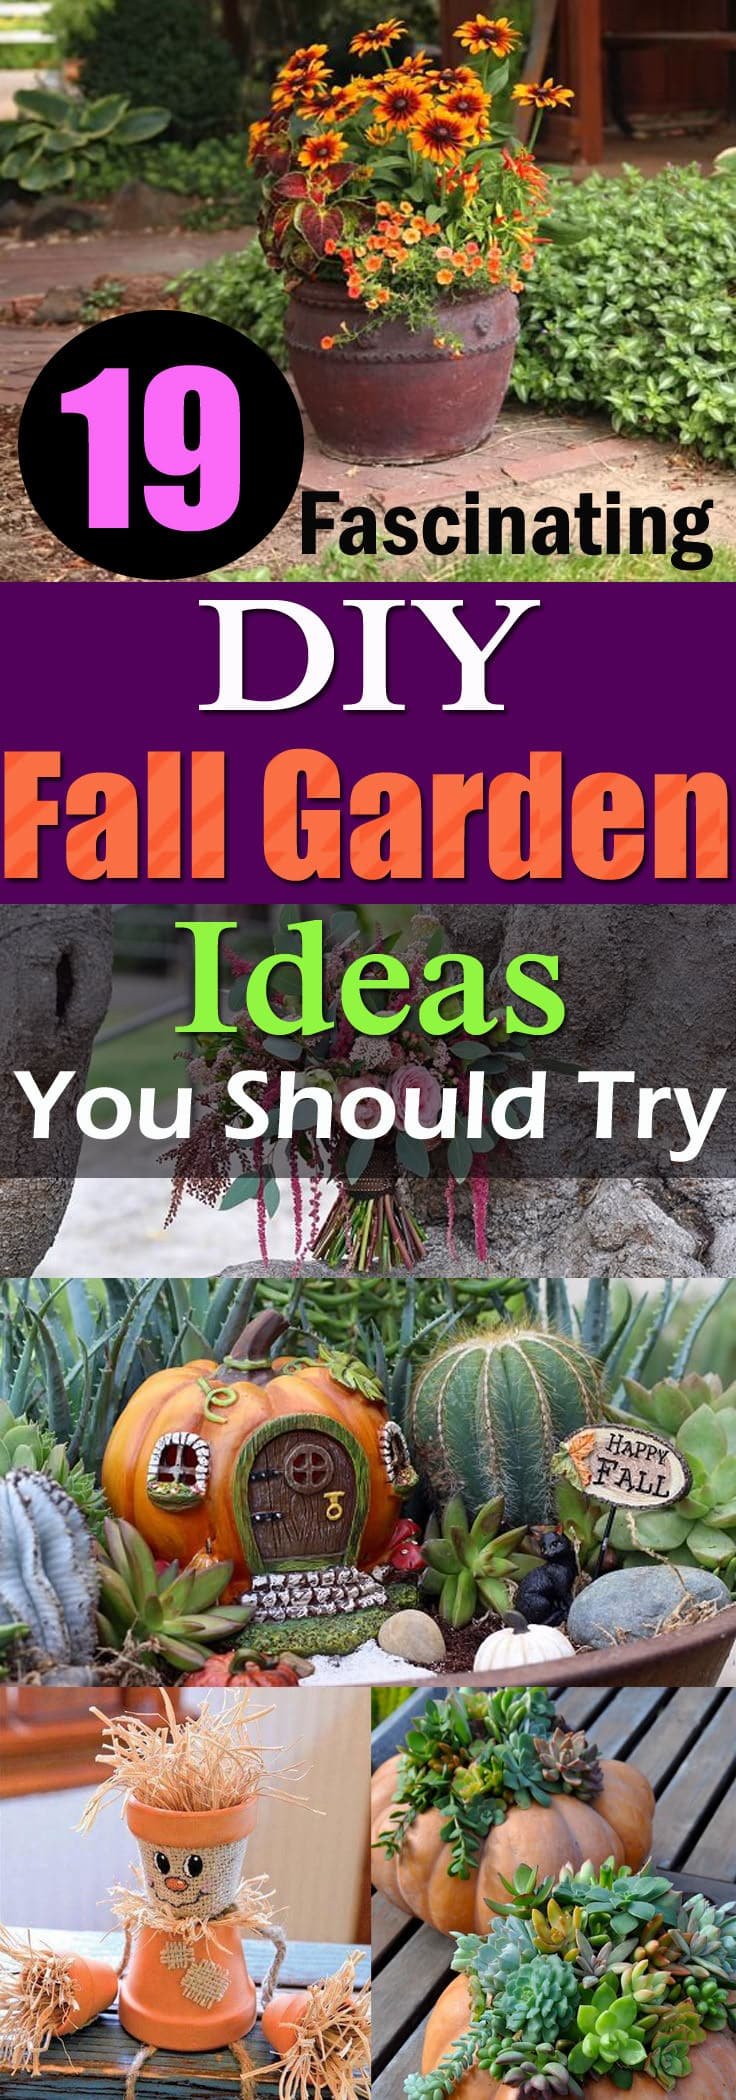 Fall brings up the lack of interest in the gardening, which amplifies in the winter, but you can avoid this by following the DIY Fall Garden Ideas and Projects here!